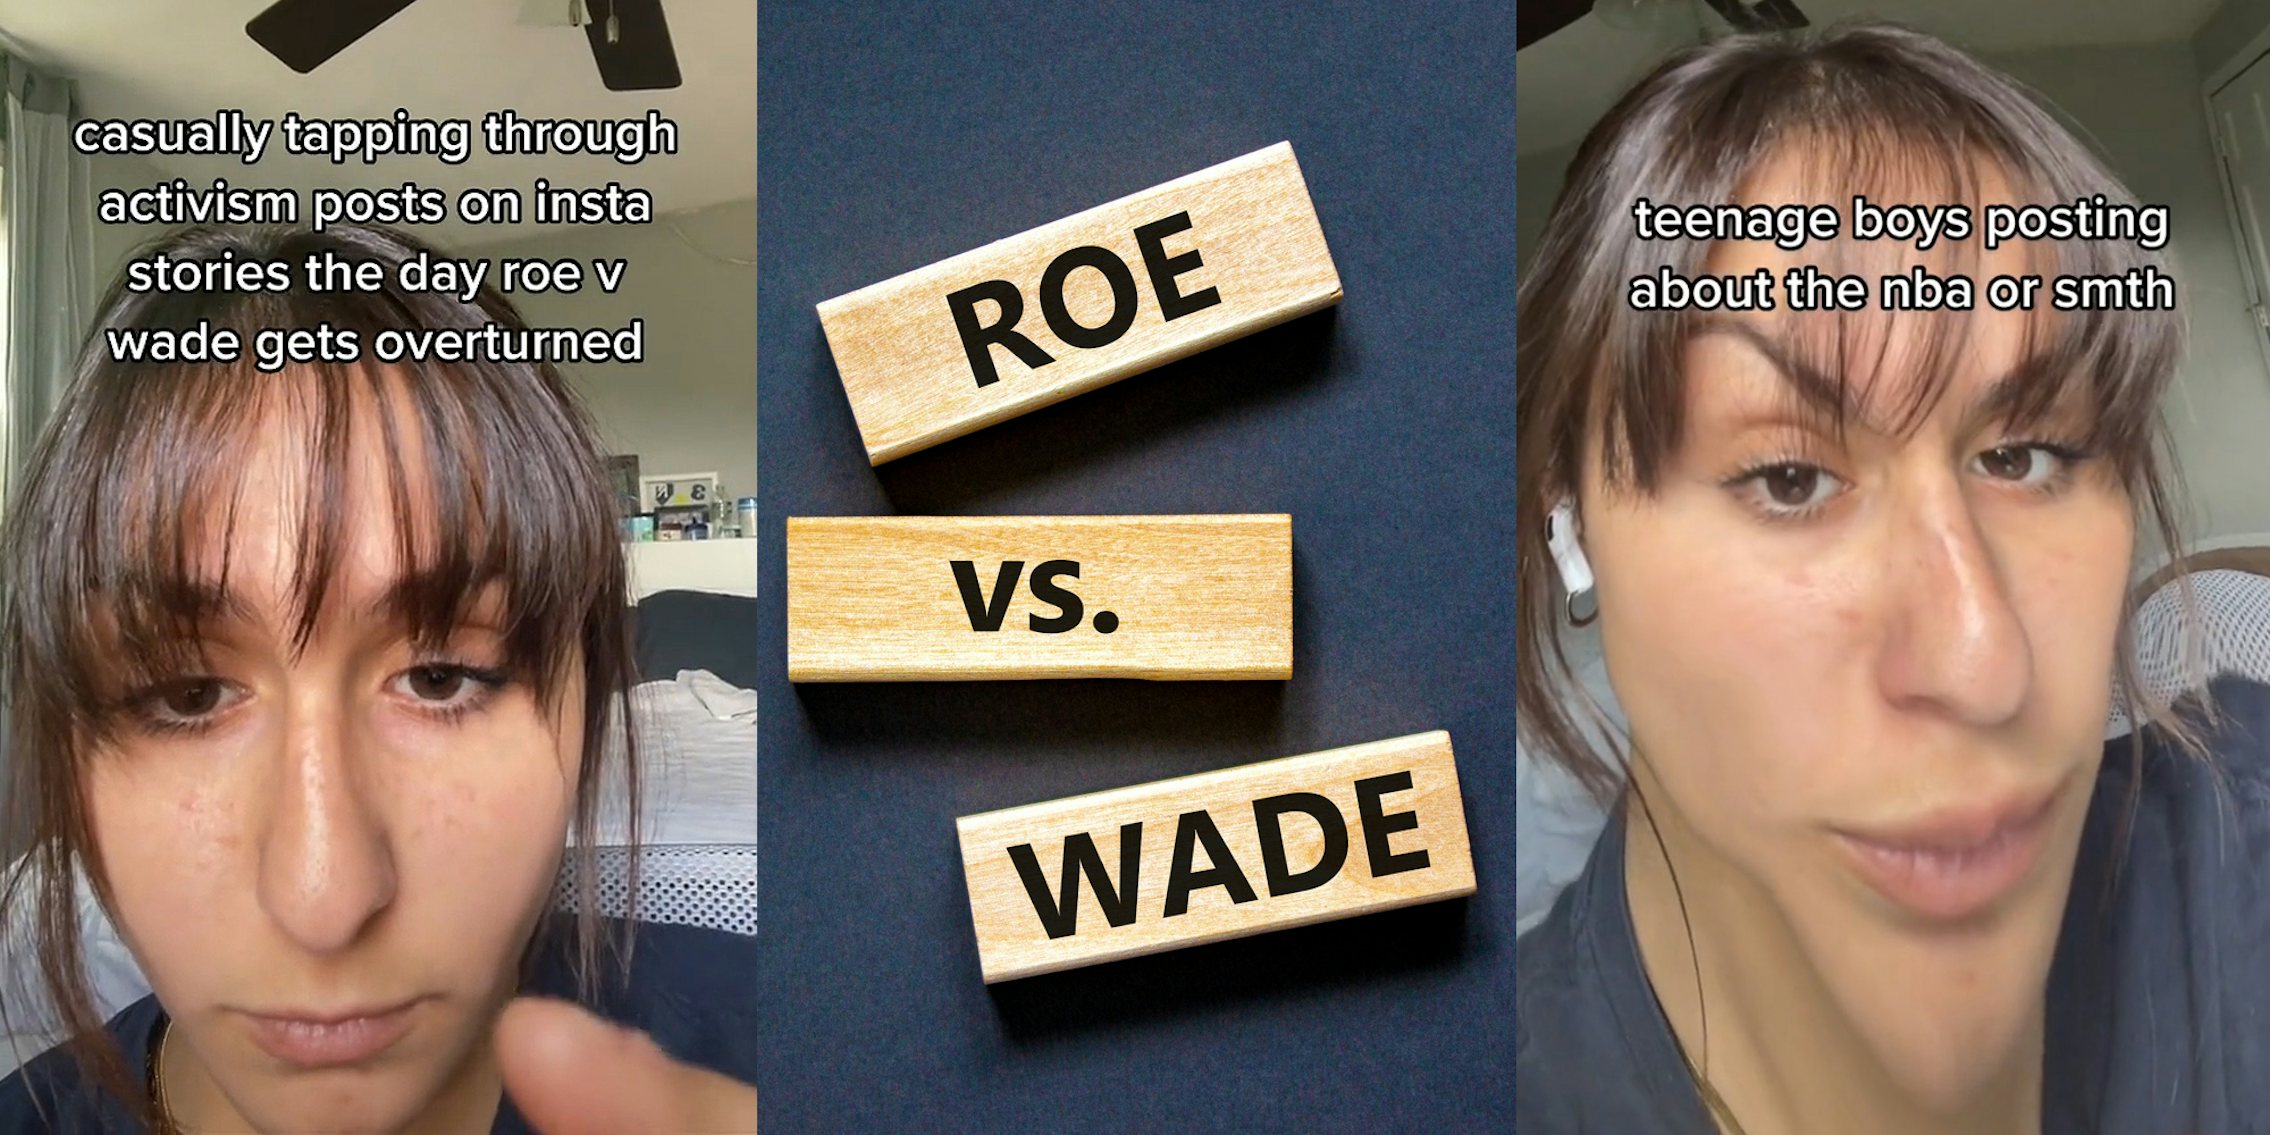 woman swiping on phone caption 'casually tapping through activism posts on insta stories the day roe v wade gets overturned' (l) 'ROE vs. WADE' on jenga blocks on blue background (C) Woman funny face filter on caption 'teenage boys posting about the nba or smth' (r)